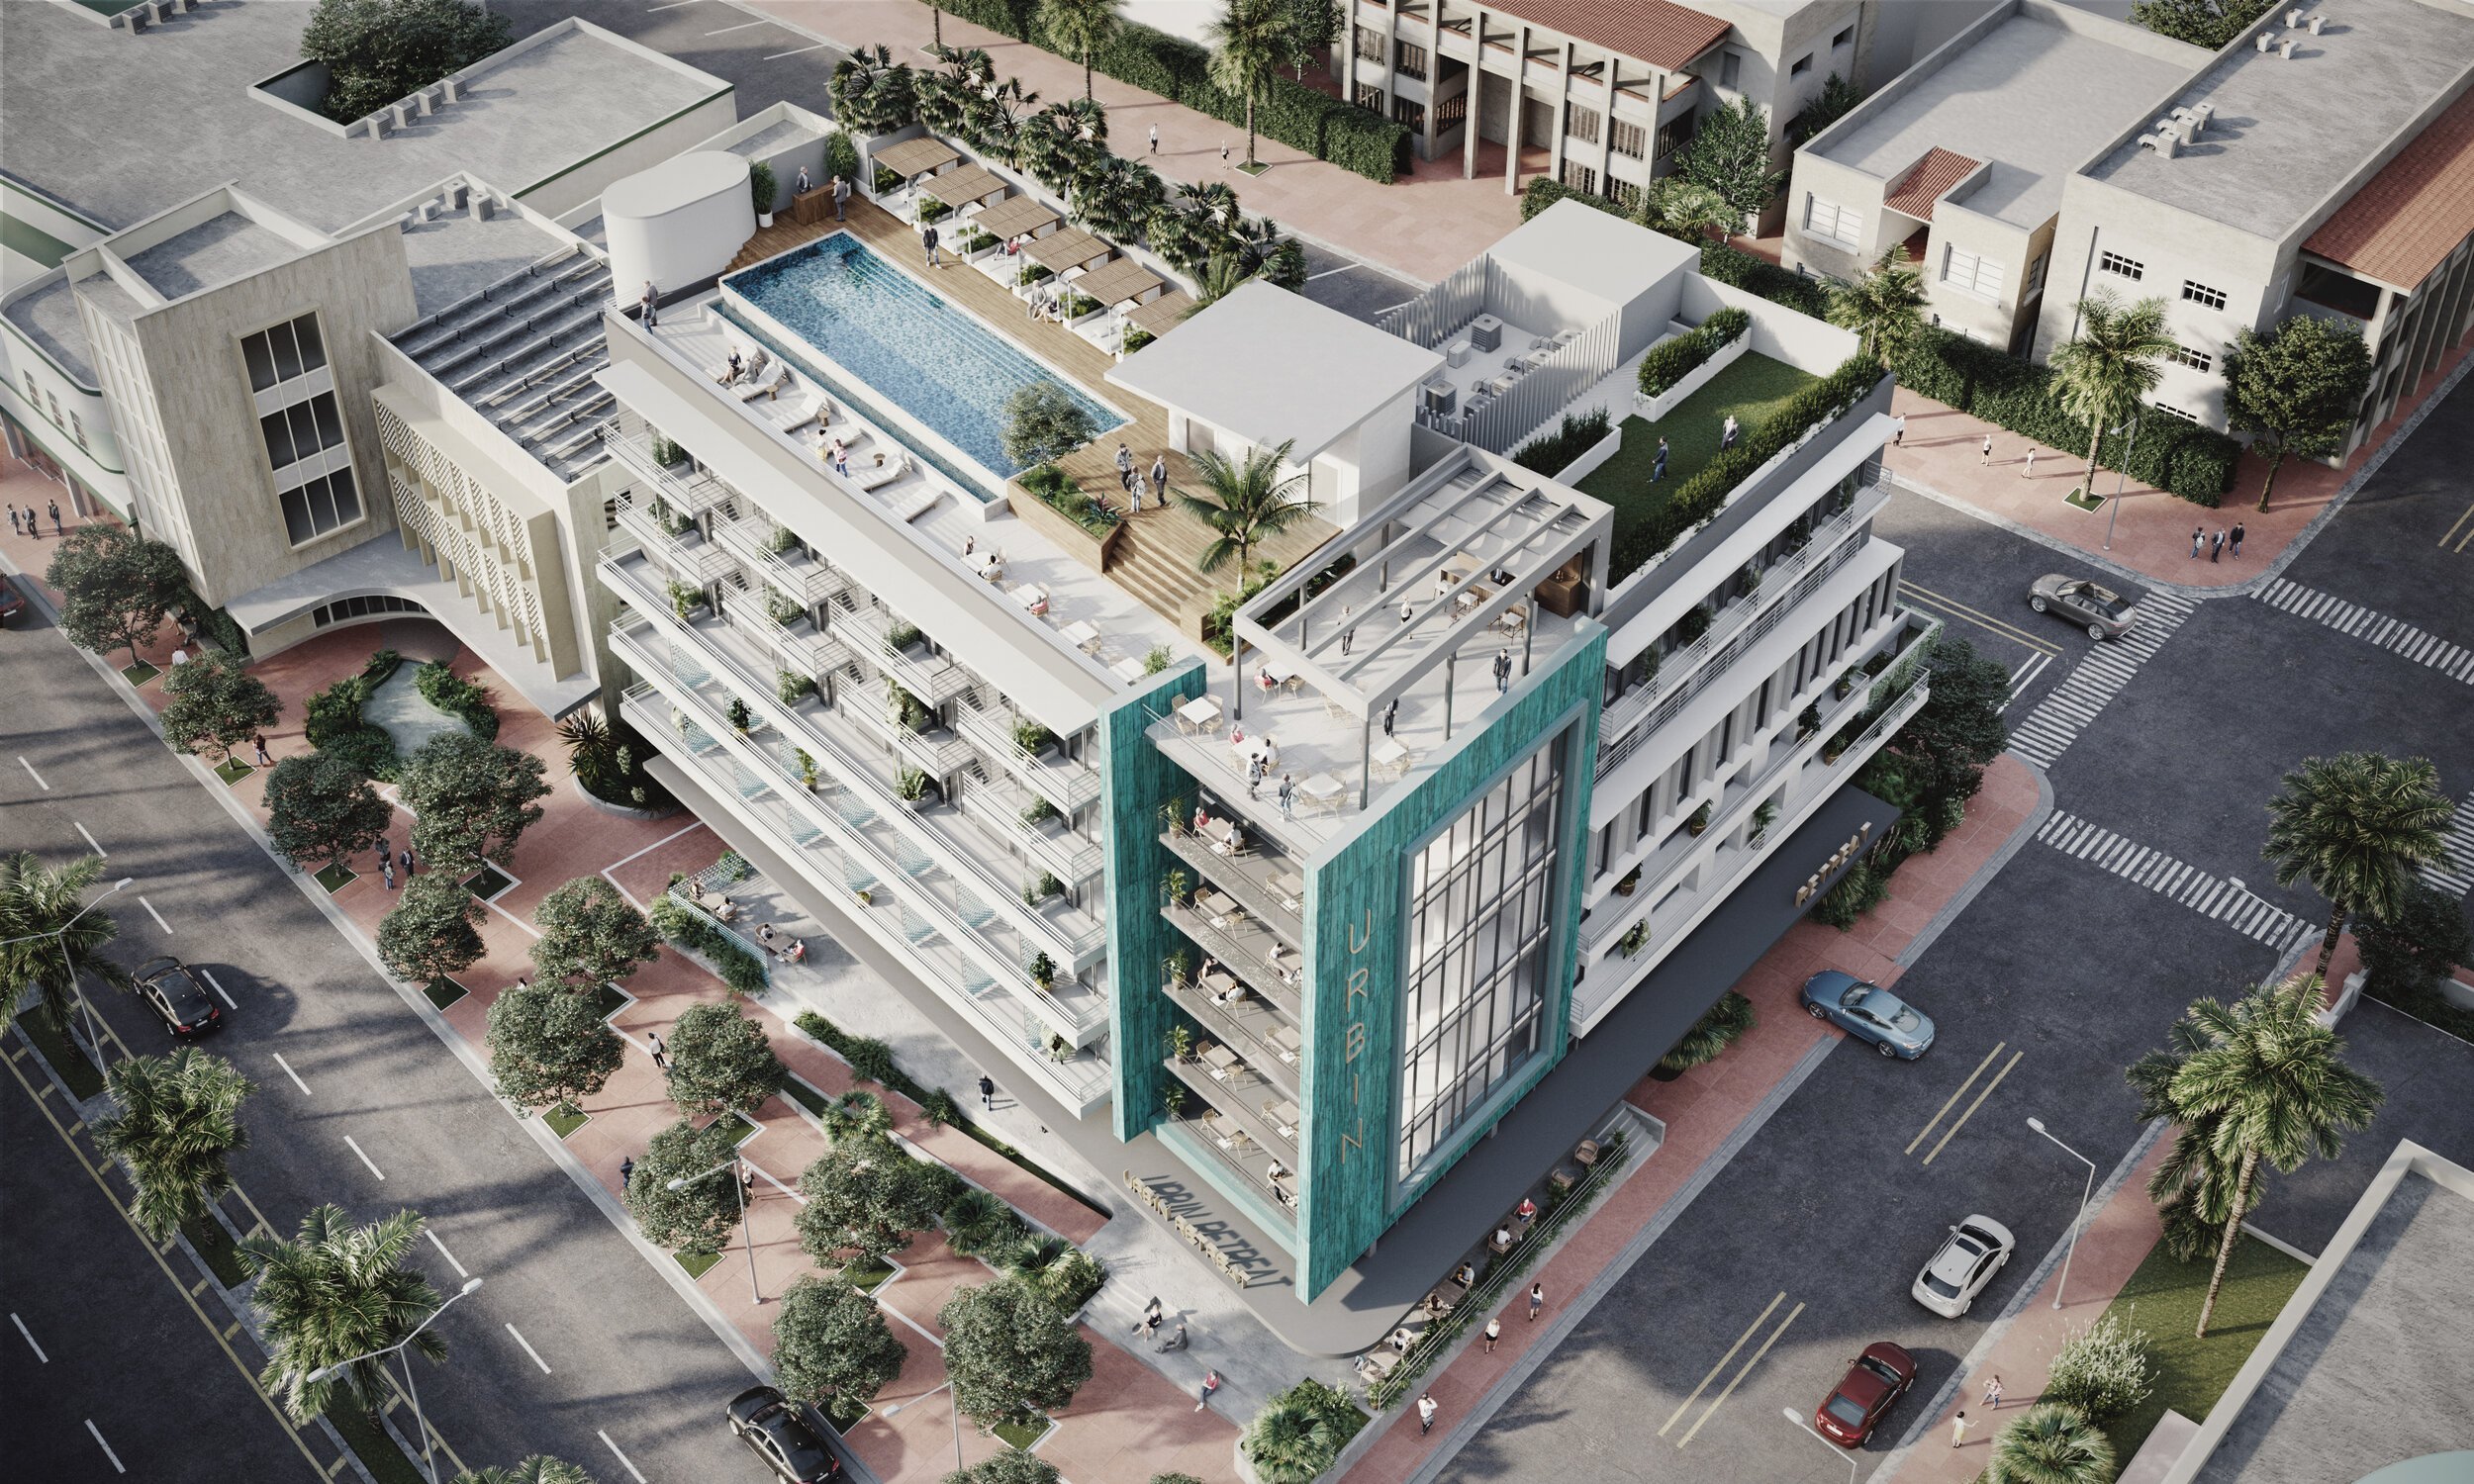 Location Ventures Announces Sellout of URBIN Miami Beach Mixed-Use Condo, Co-Working Lifestyle Project5.jpeg